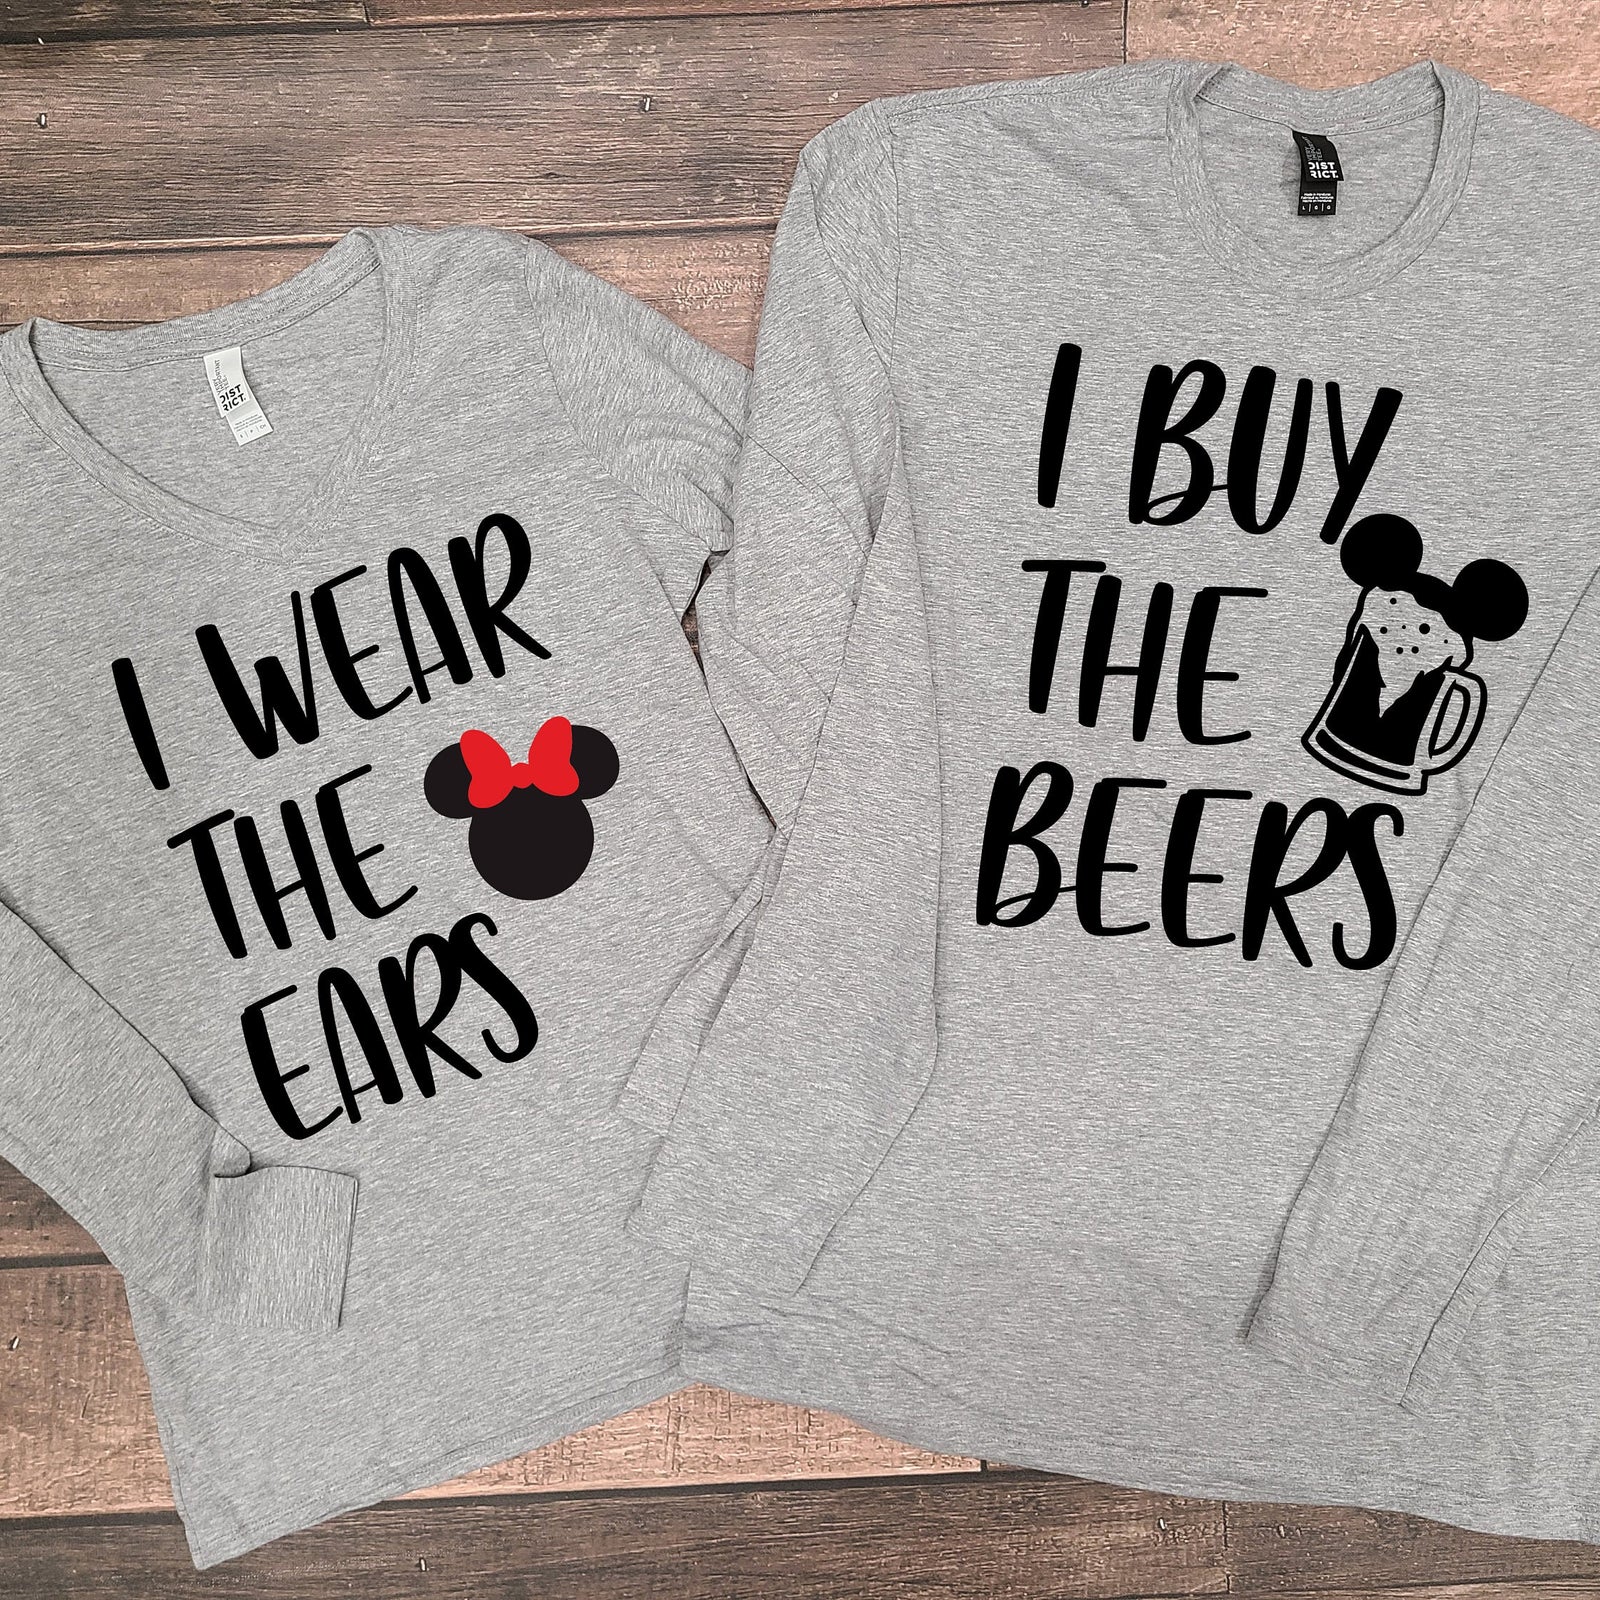 I Wear the Ears Minnie and I Buy the Beers Mickey Long Sleeve T Shirts - Disney Couples - Custom Family Matching T Shirts